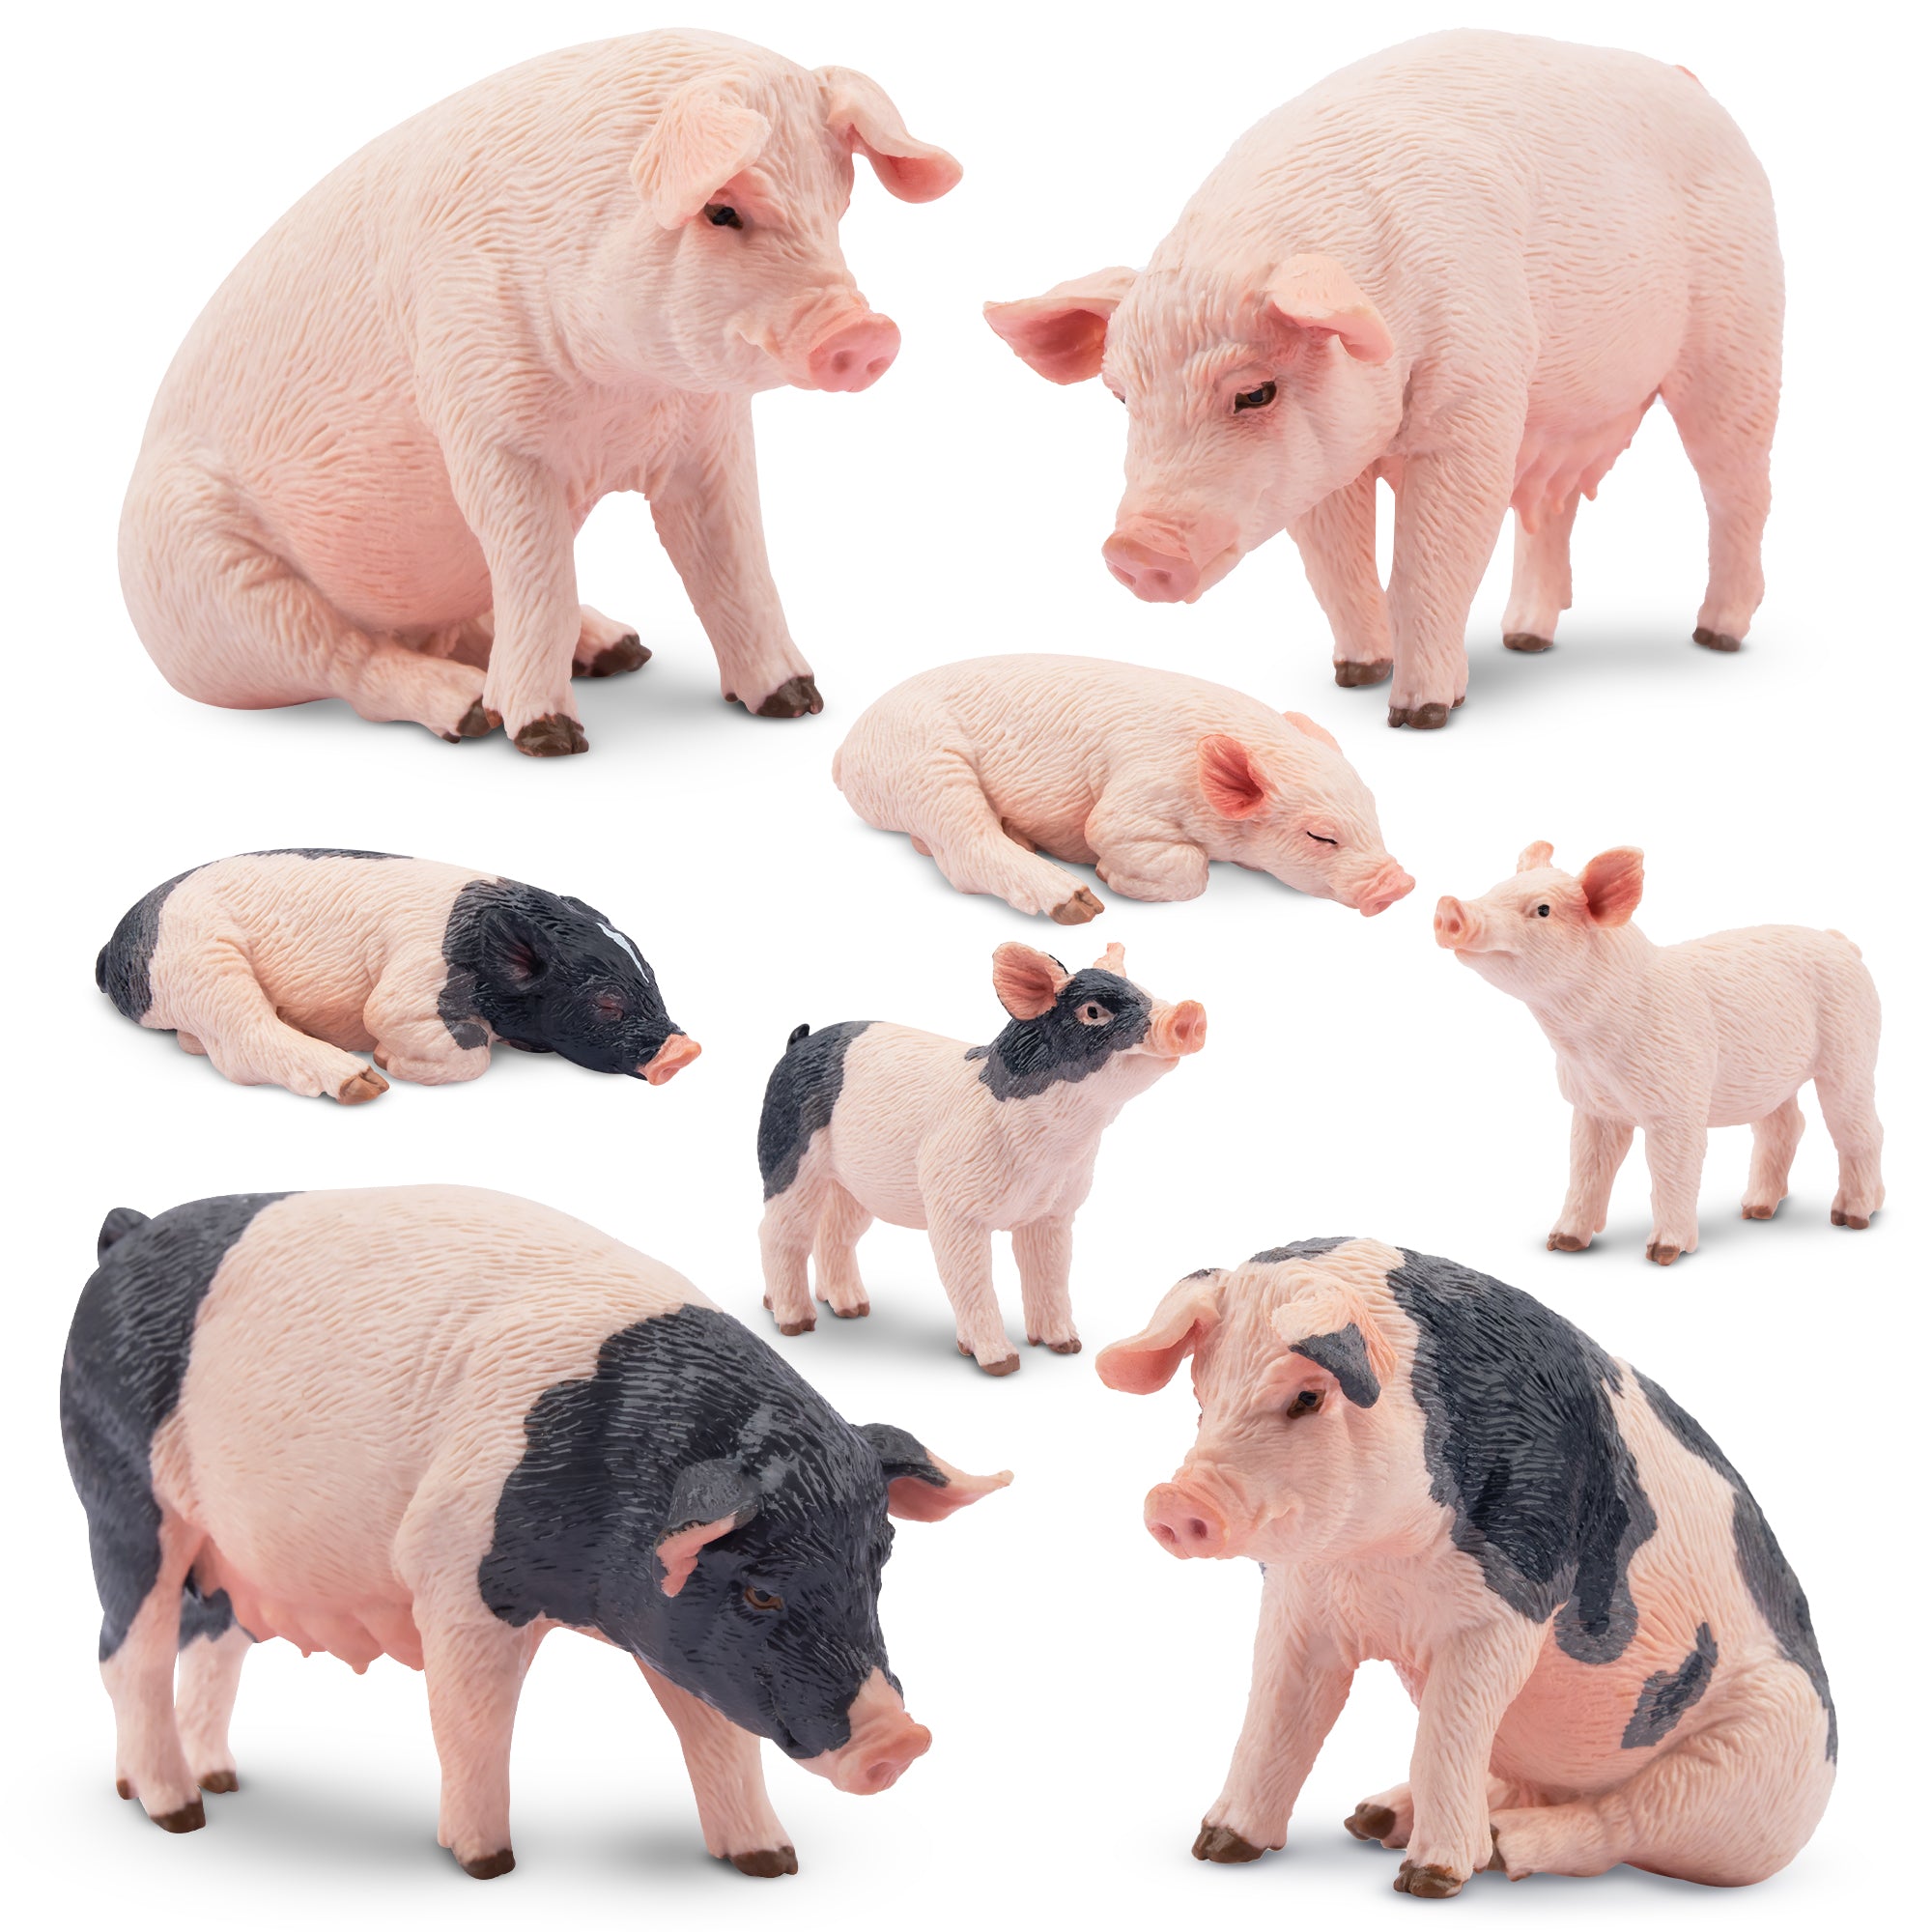 8-Piece Pig Family Figurines Playset with Adult & Baby Pigs